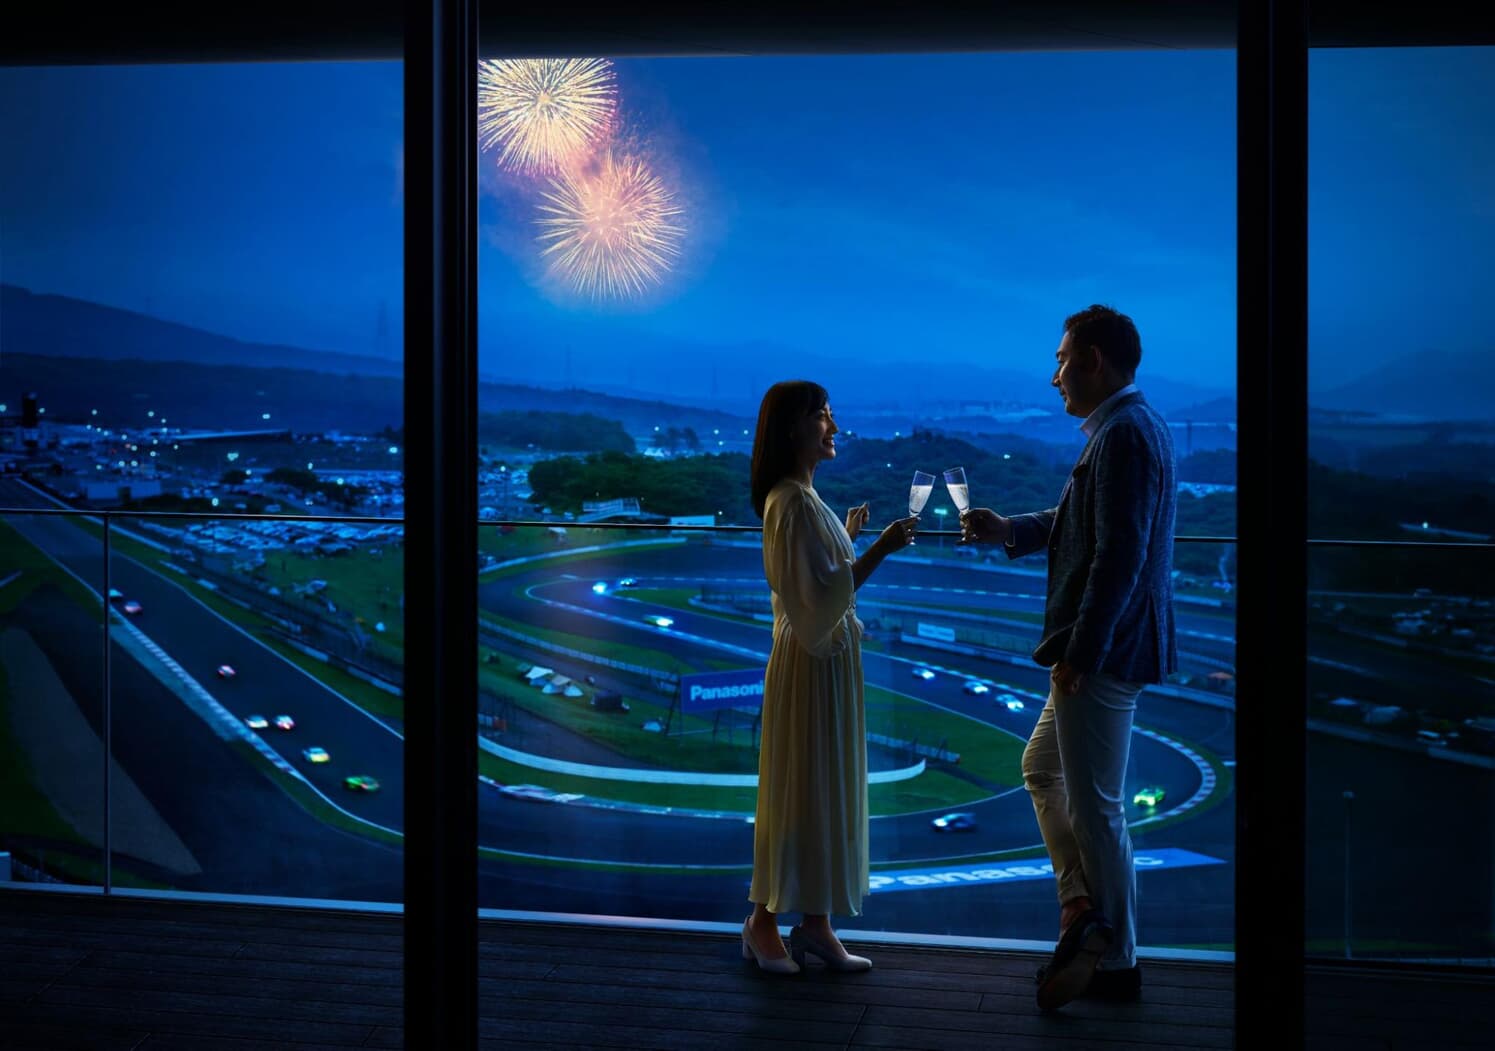 Mountains and Motorsport: Experiencing the Fuji Speedway Hotel